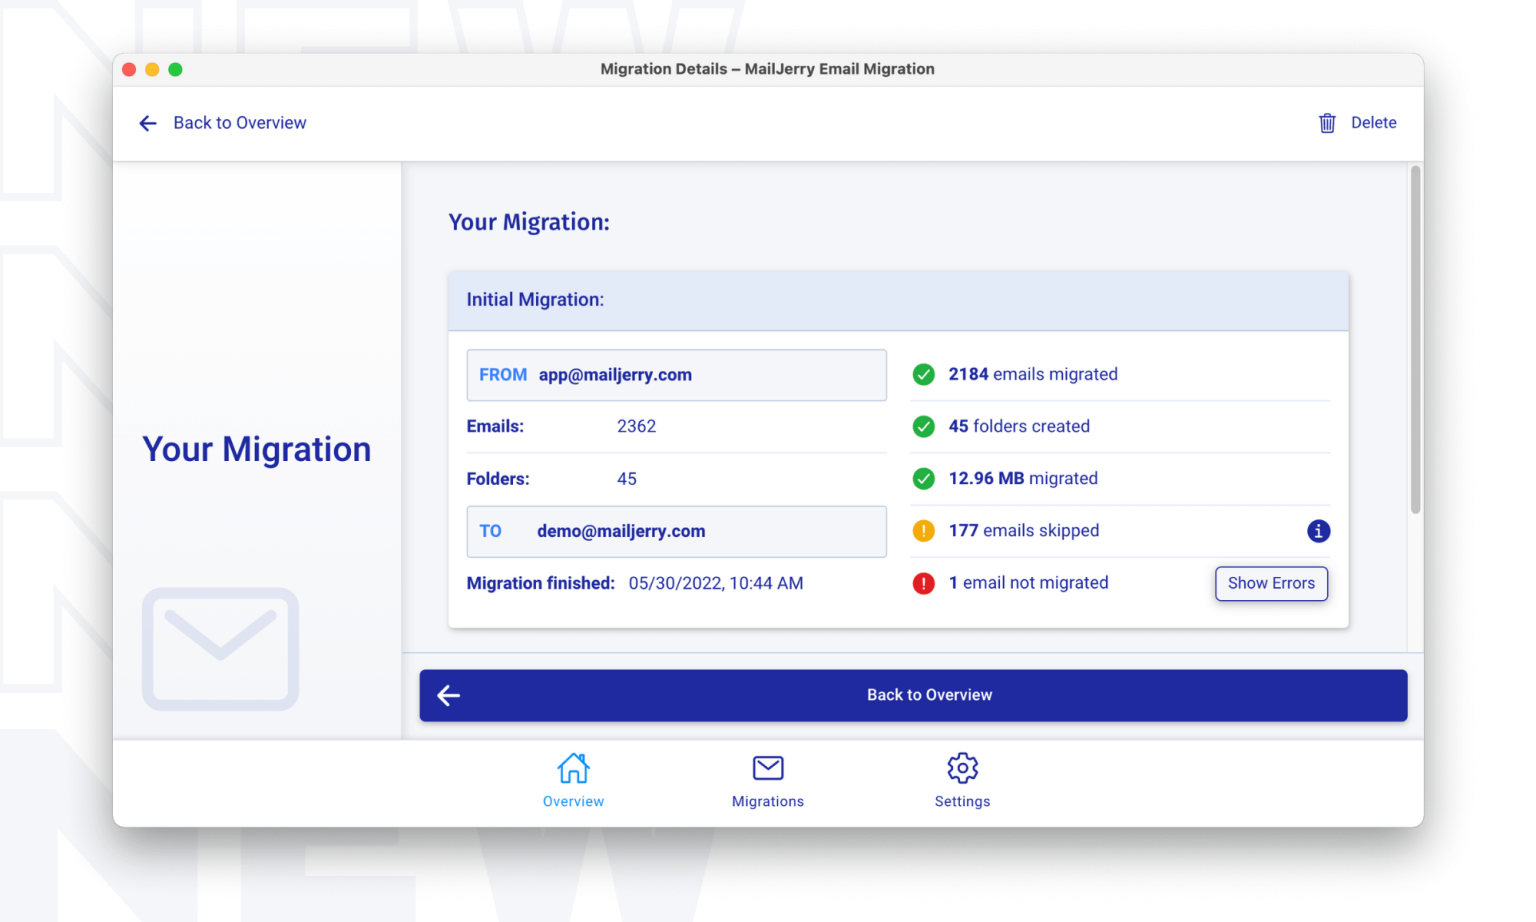 Cloud Email-Migration Software: New Email Migration Summary